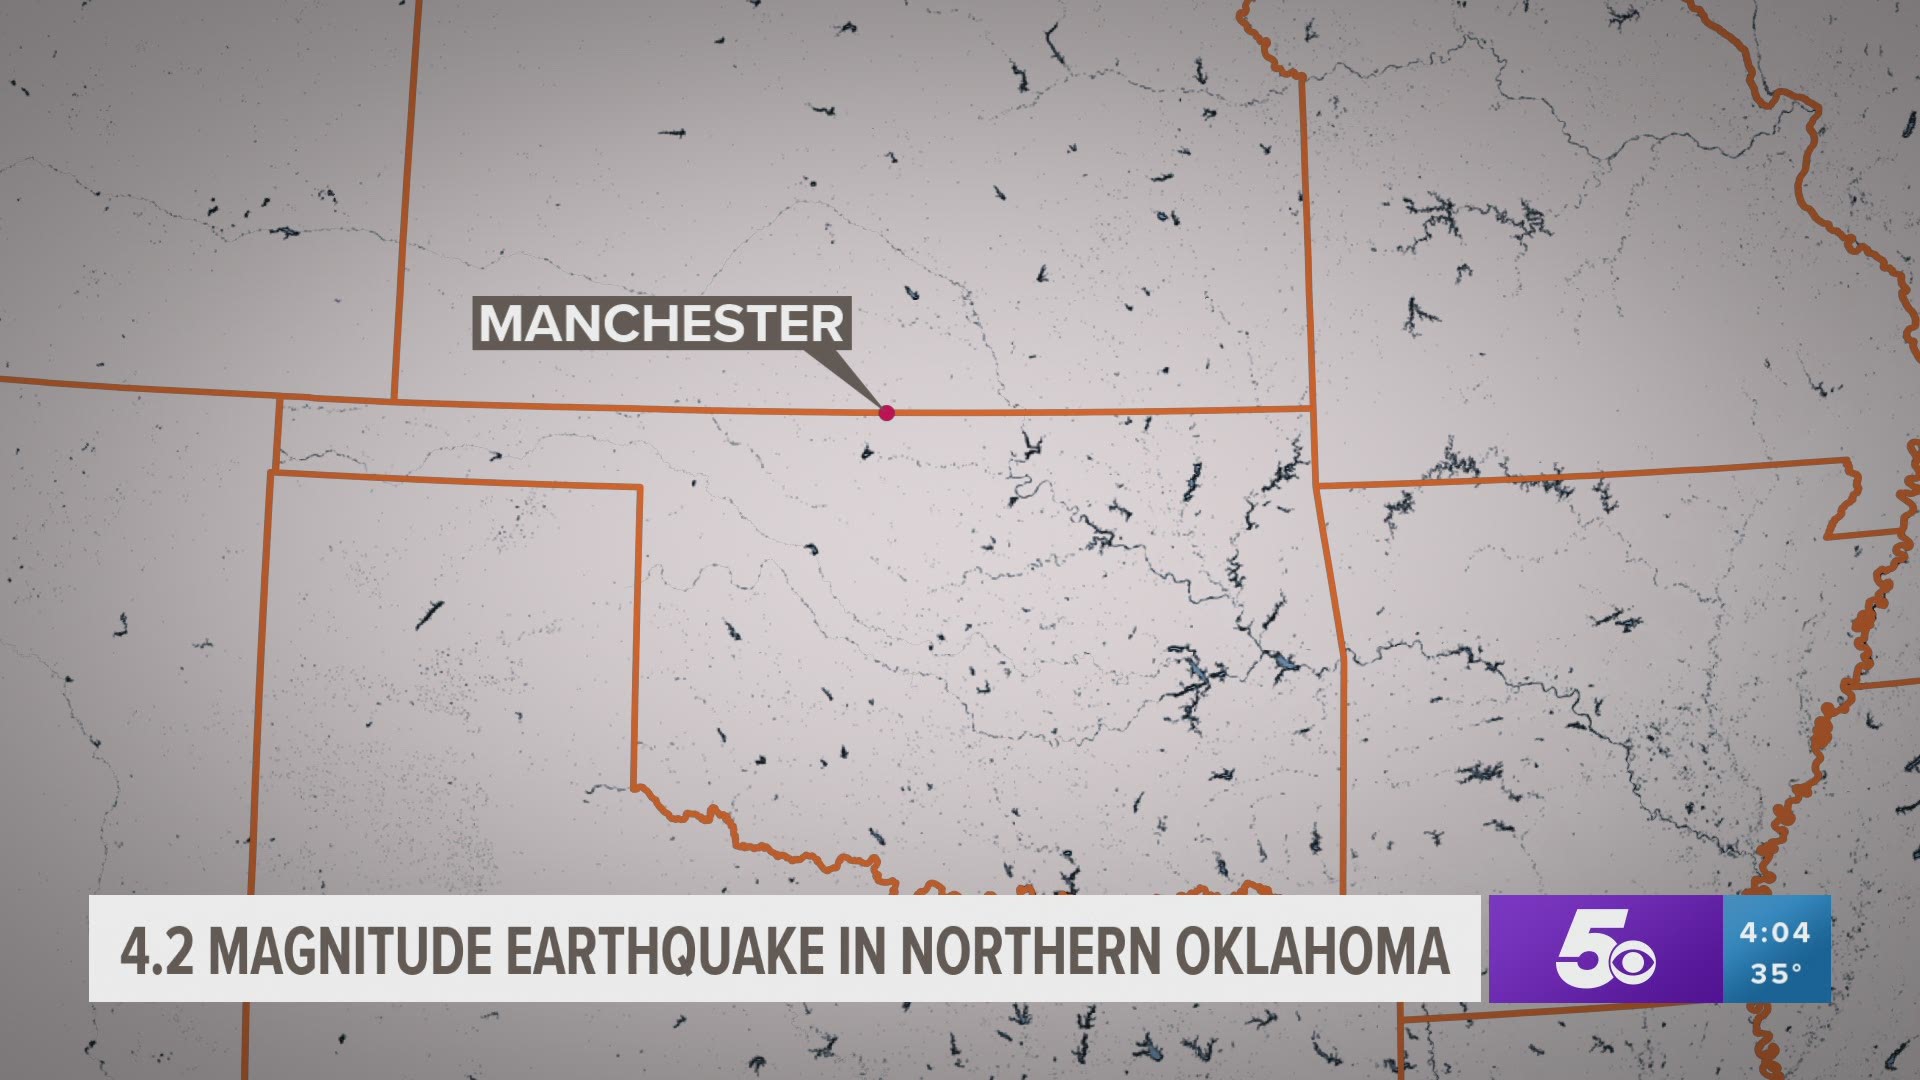 No injuries or damage have been reported from the quake.